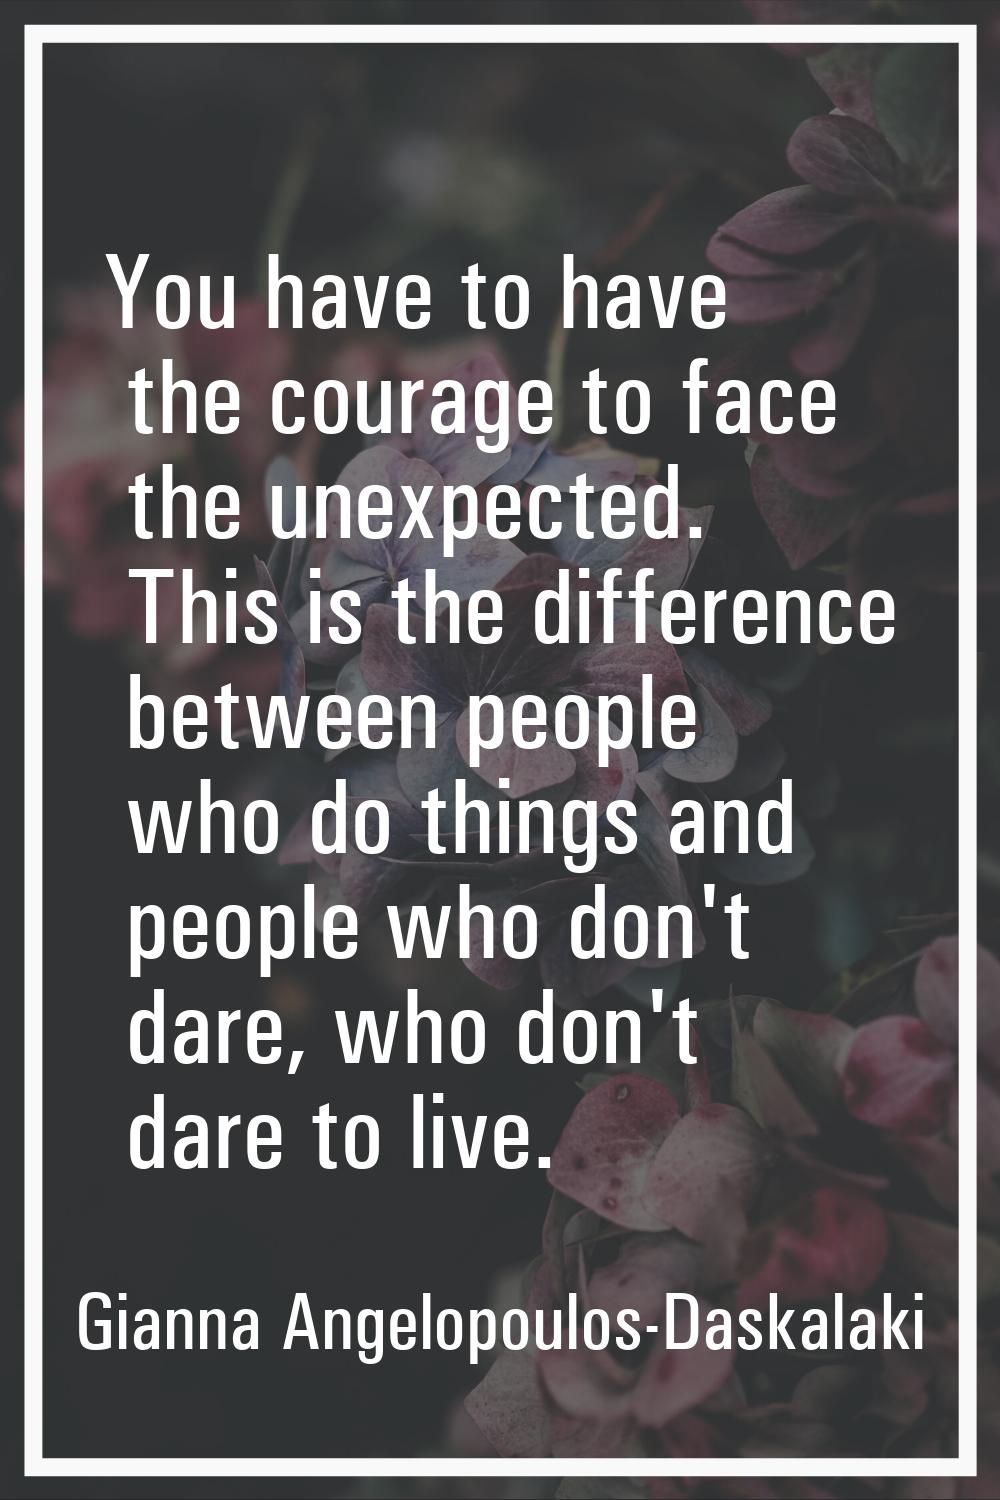 You have to have the courage to face the unexpected. This is the difference between people who do t